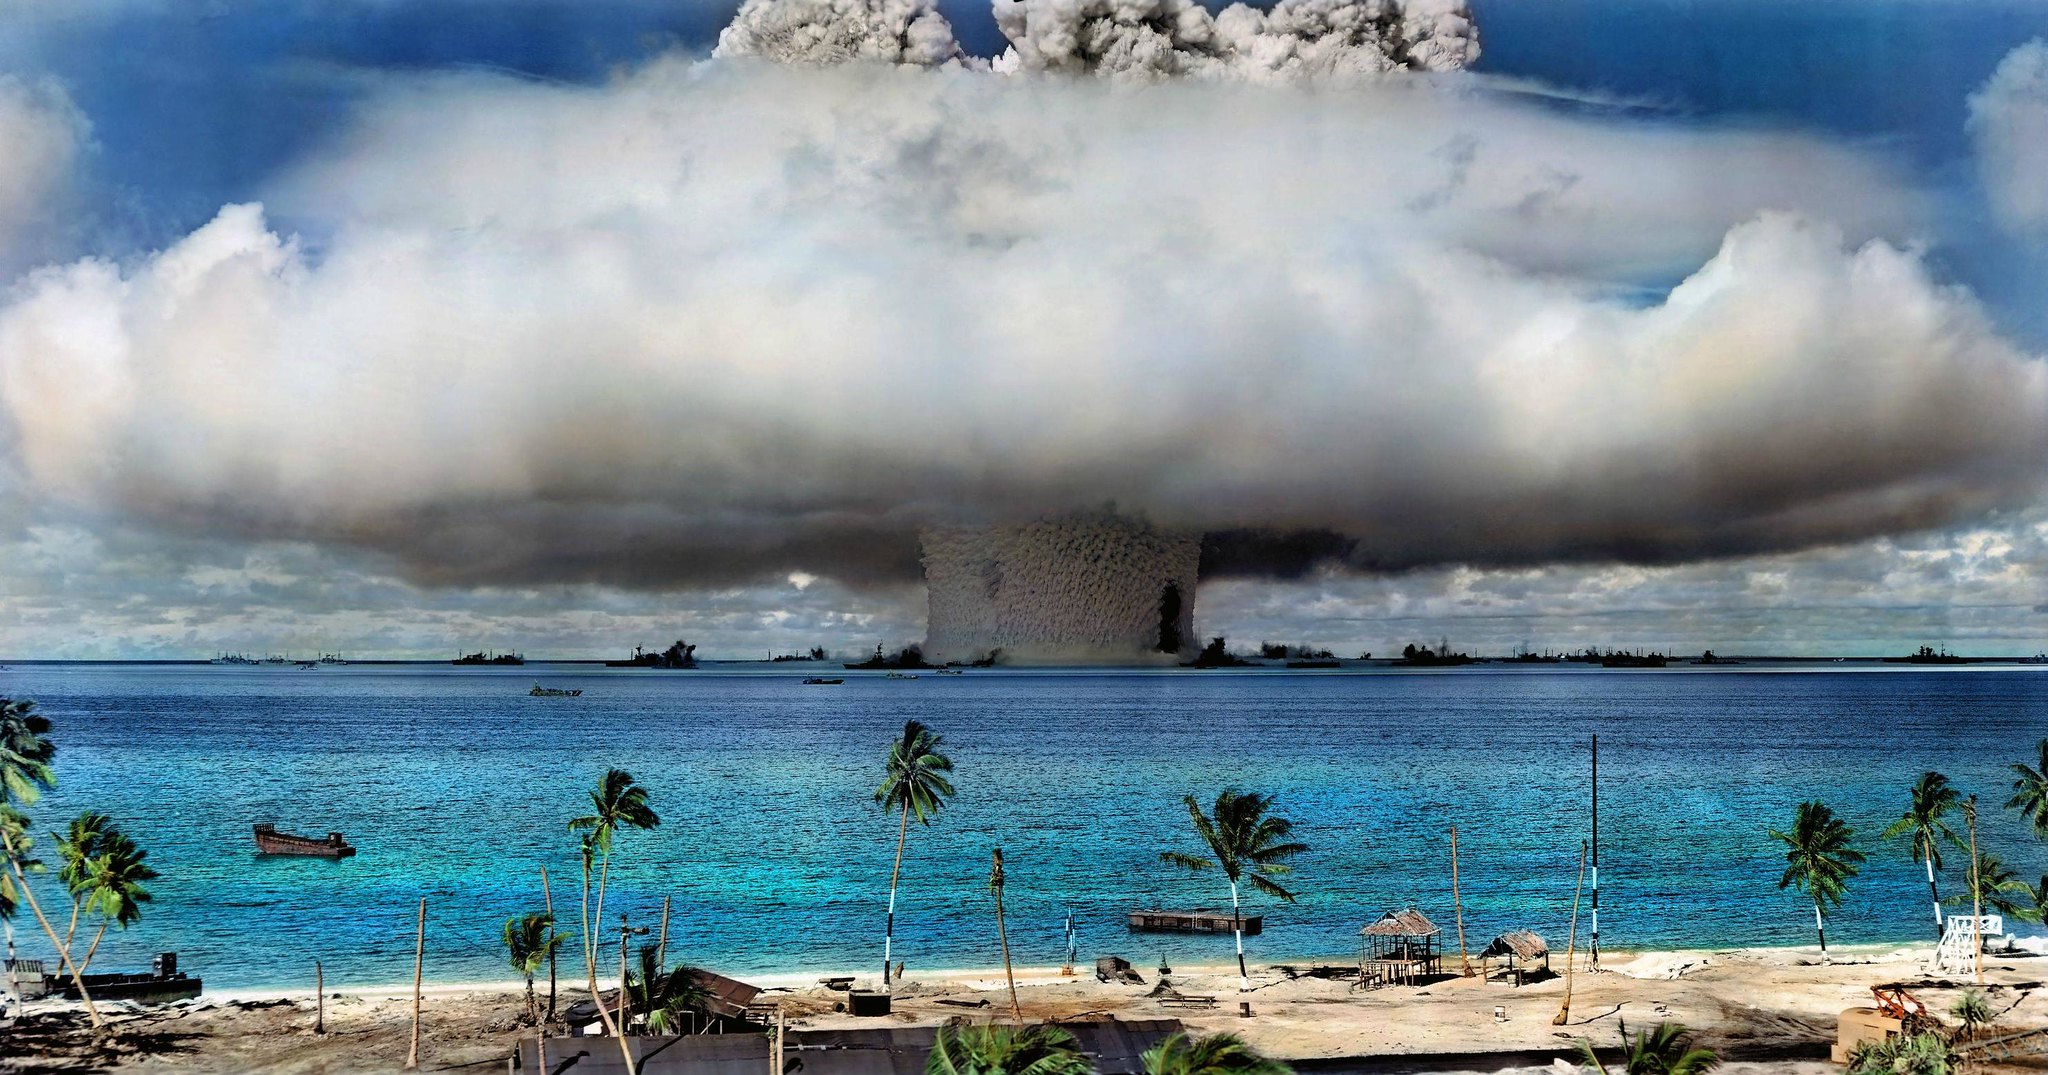 nuclear test 核試爆（圖／International Campaign to Abolish Nuclear Weapons／CC BY-NC 2.0）